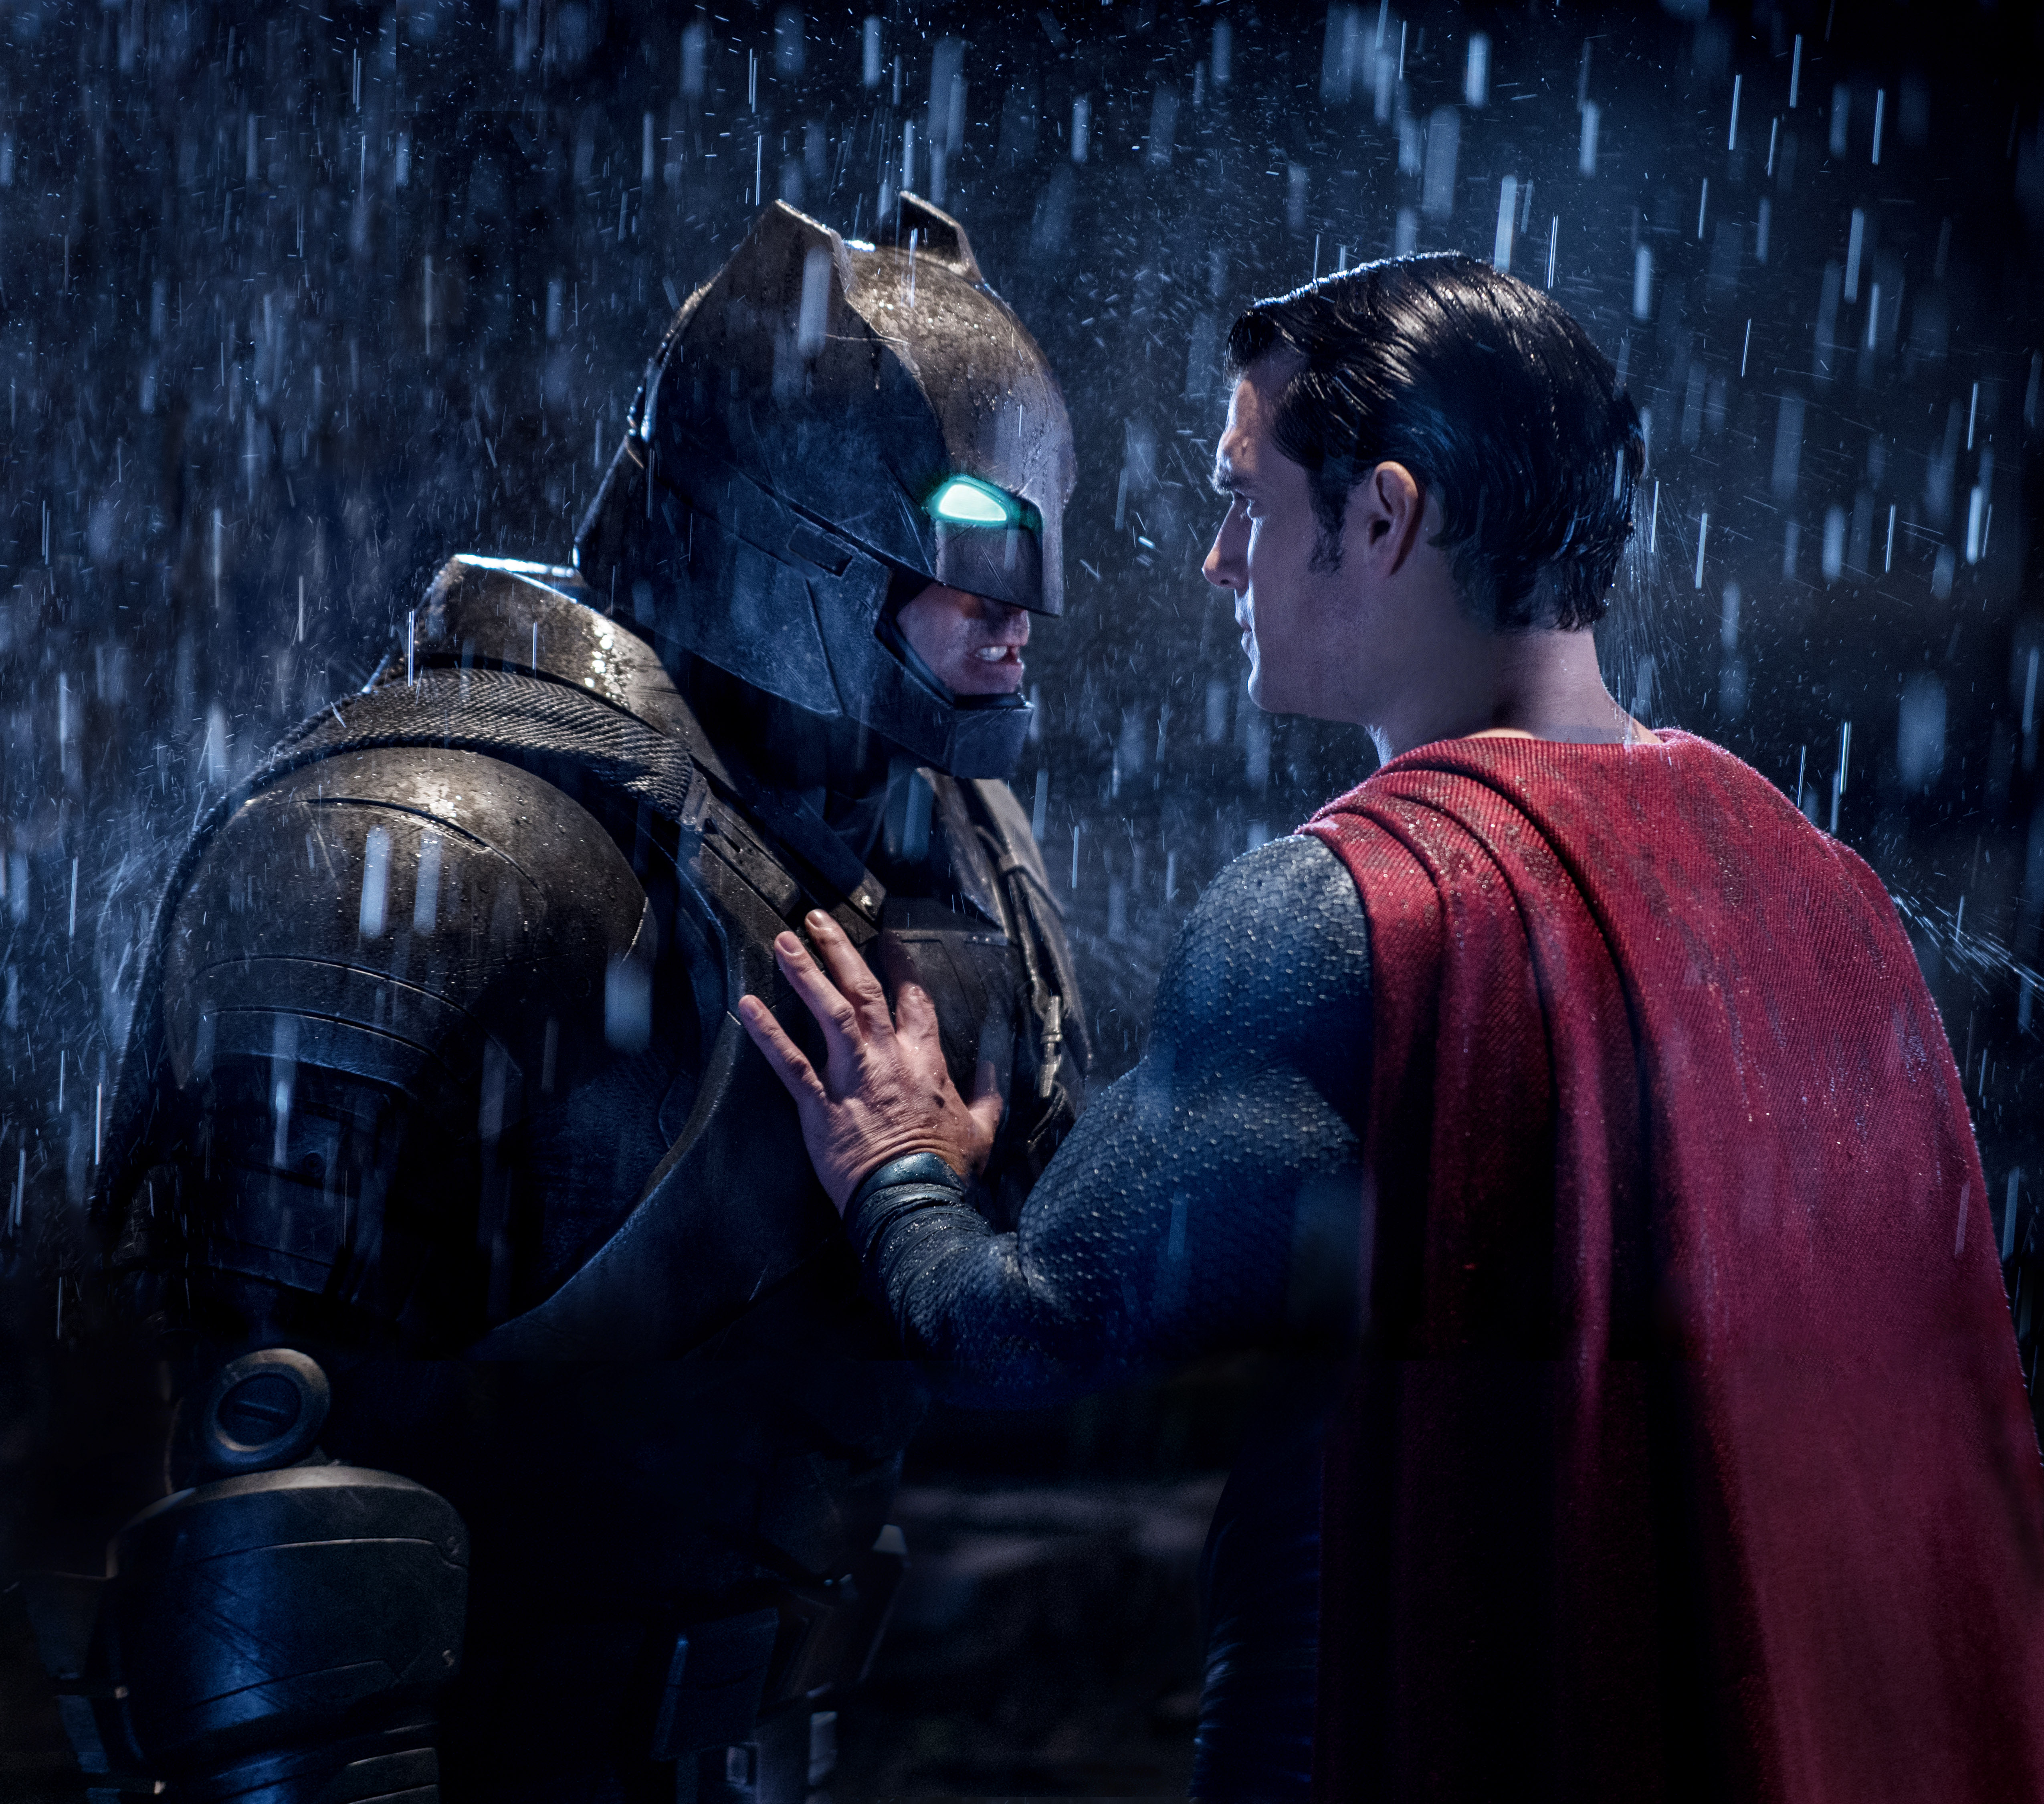 The super heroes face off. Photo: Courtesy of Warner Bros. Pictures/ TM & © DC Comic